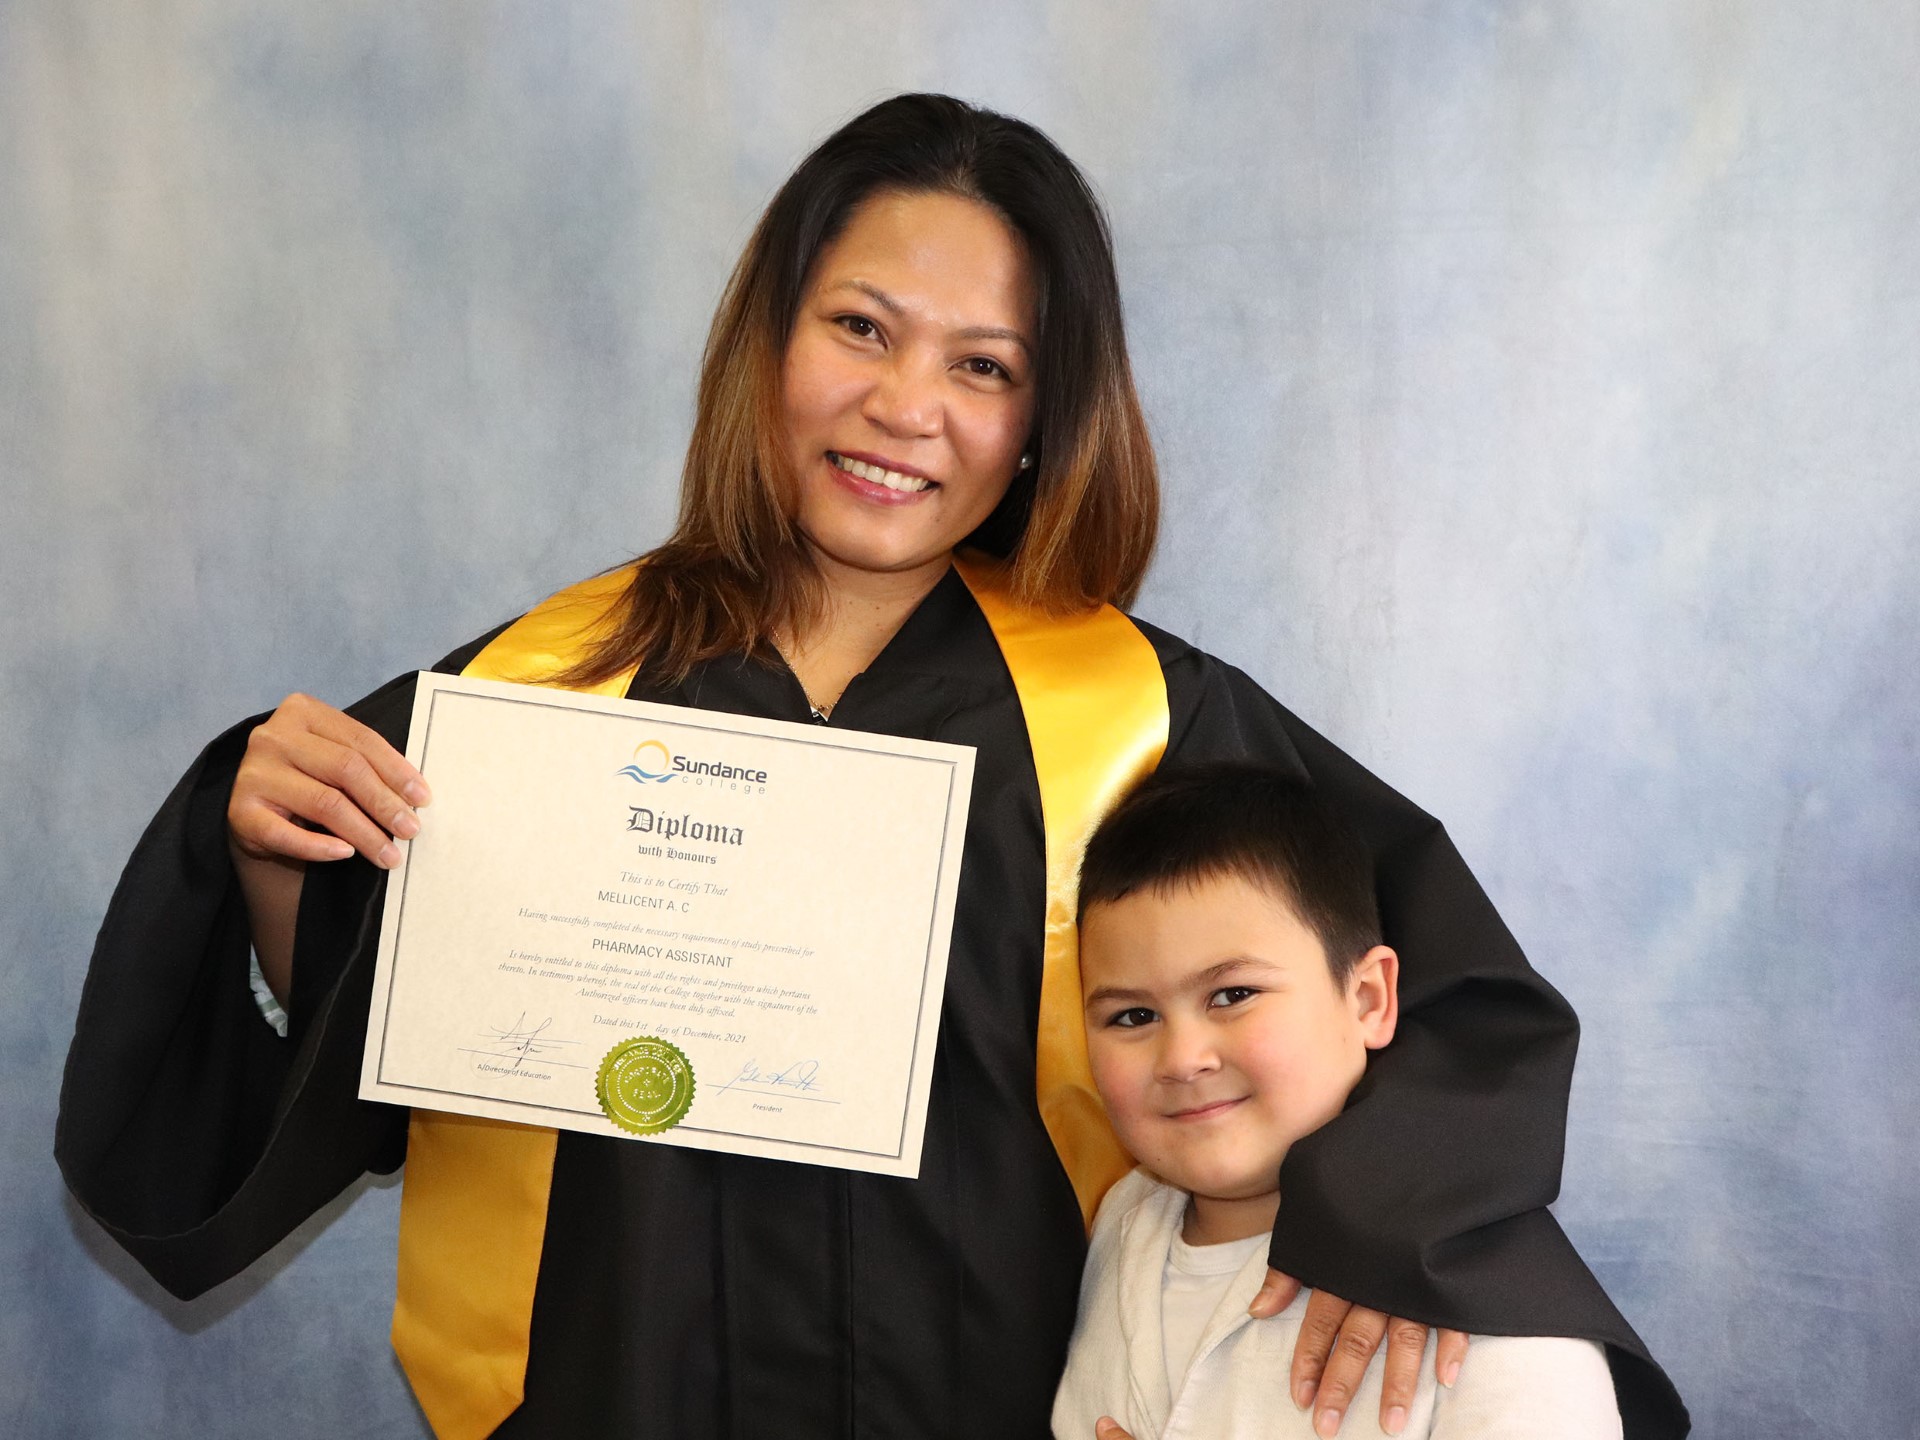 A happy Sundance College graduate holds her Pharmacy Assistant Diploma in one hand as she cuddles her son in the other.